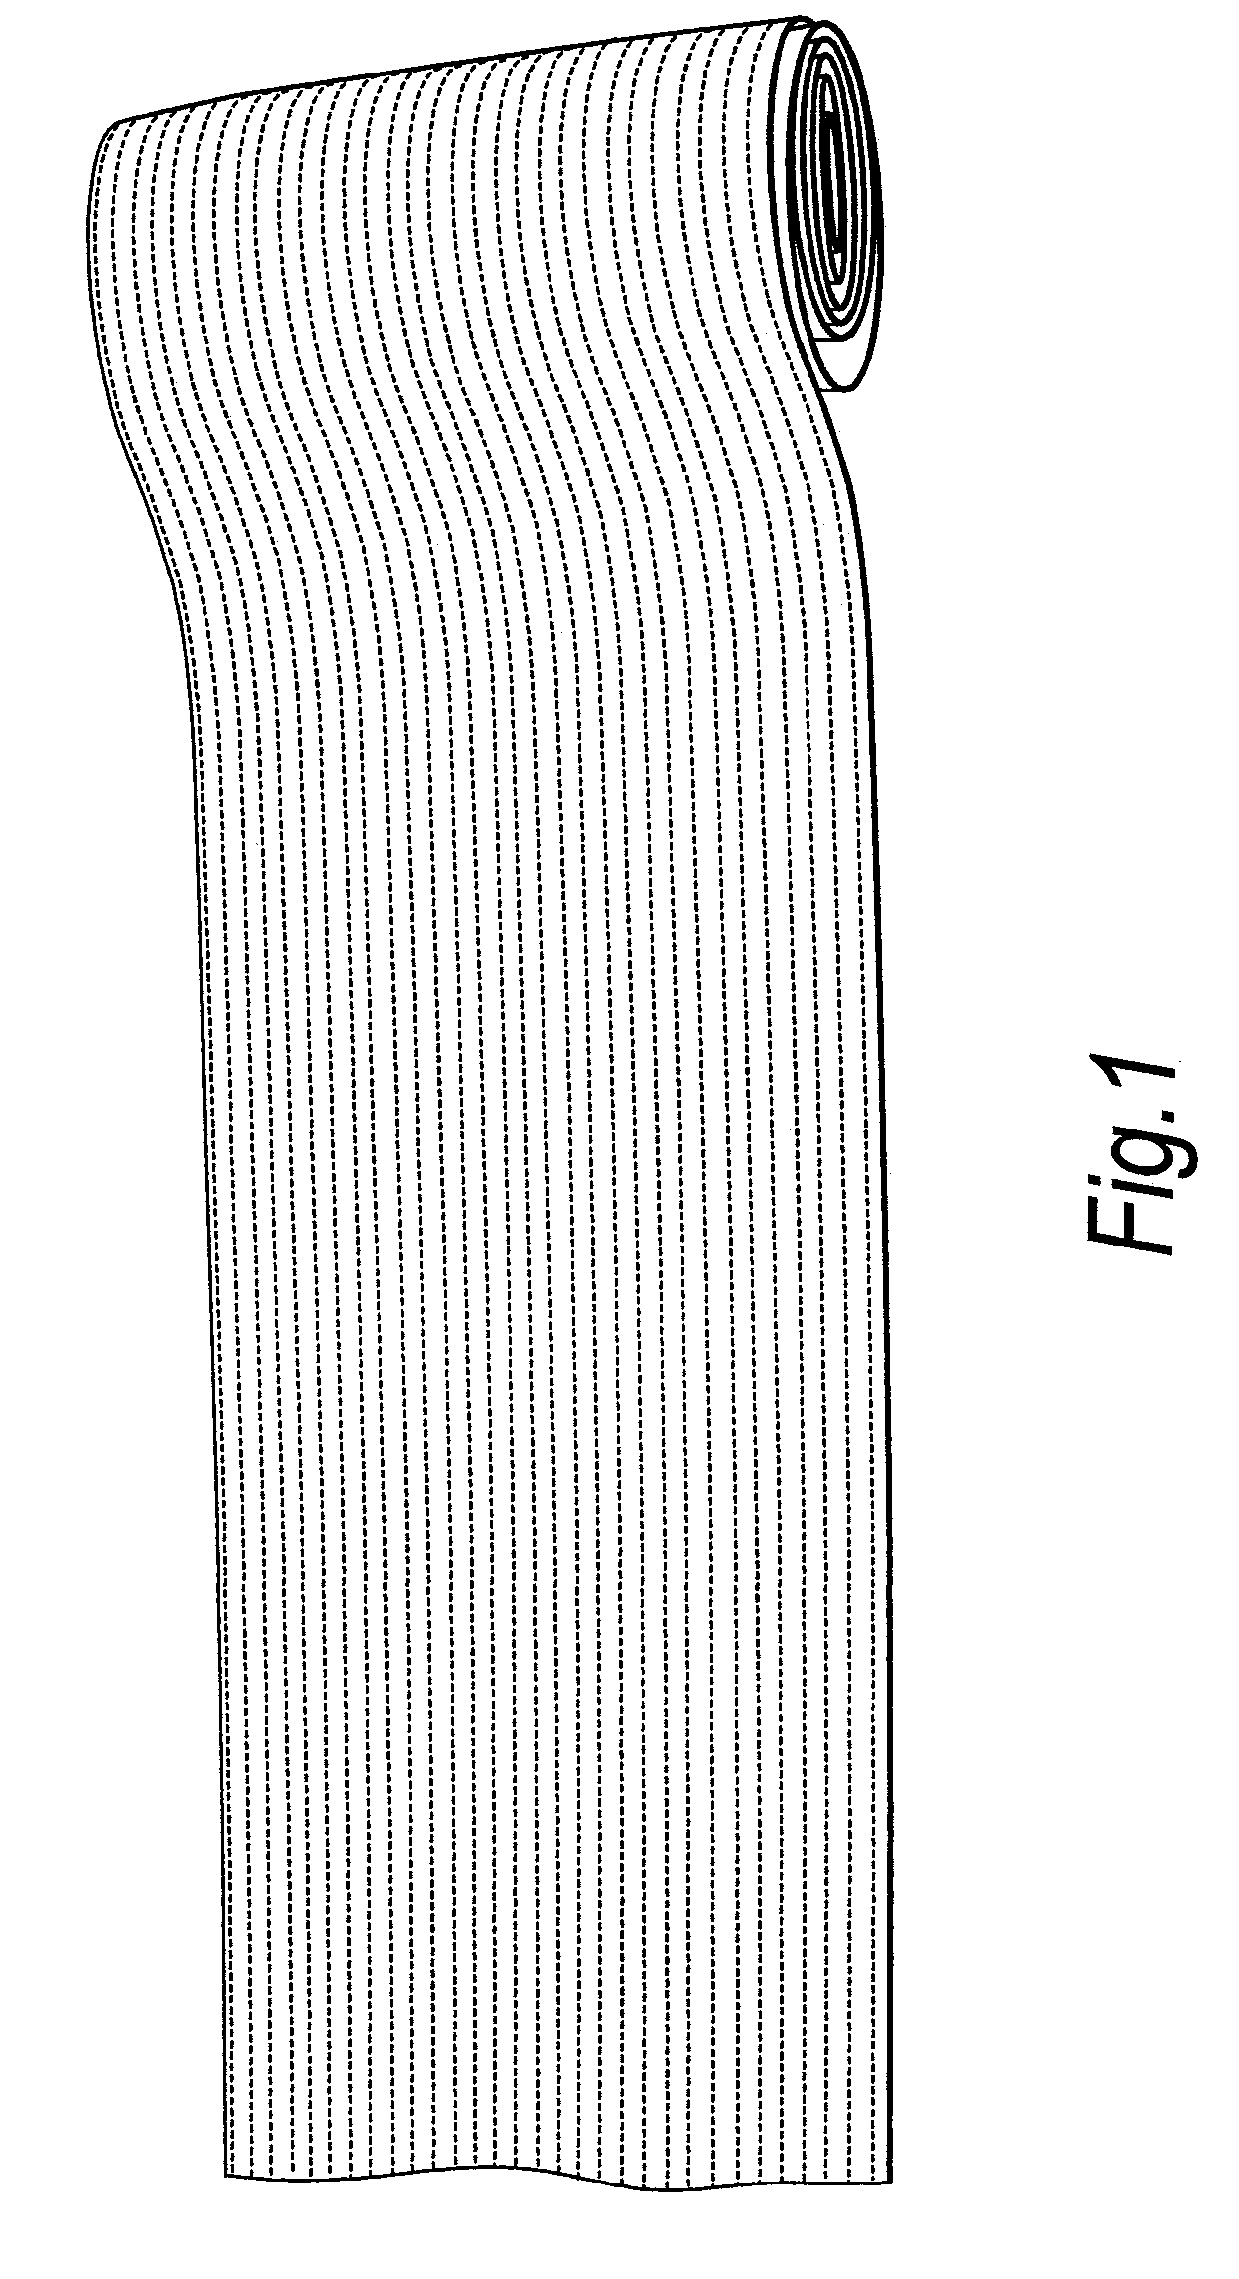 Wound dressing material